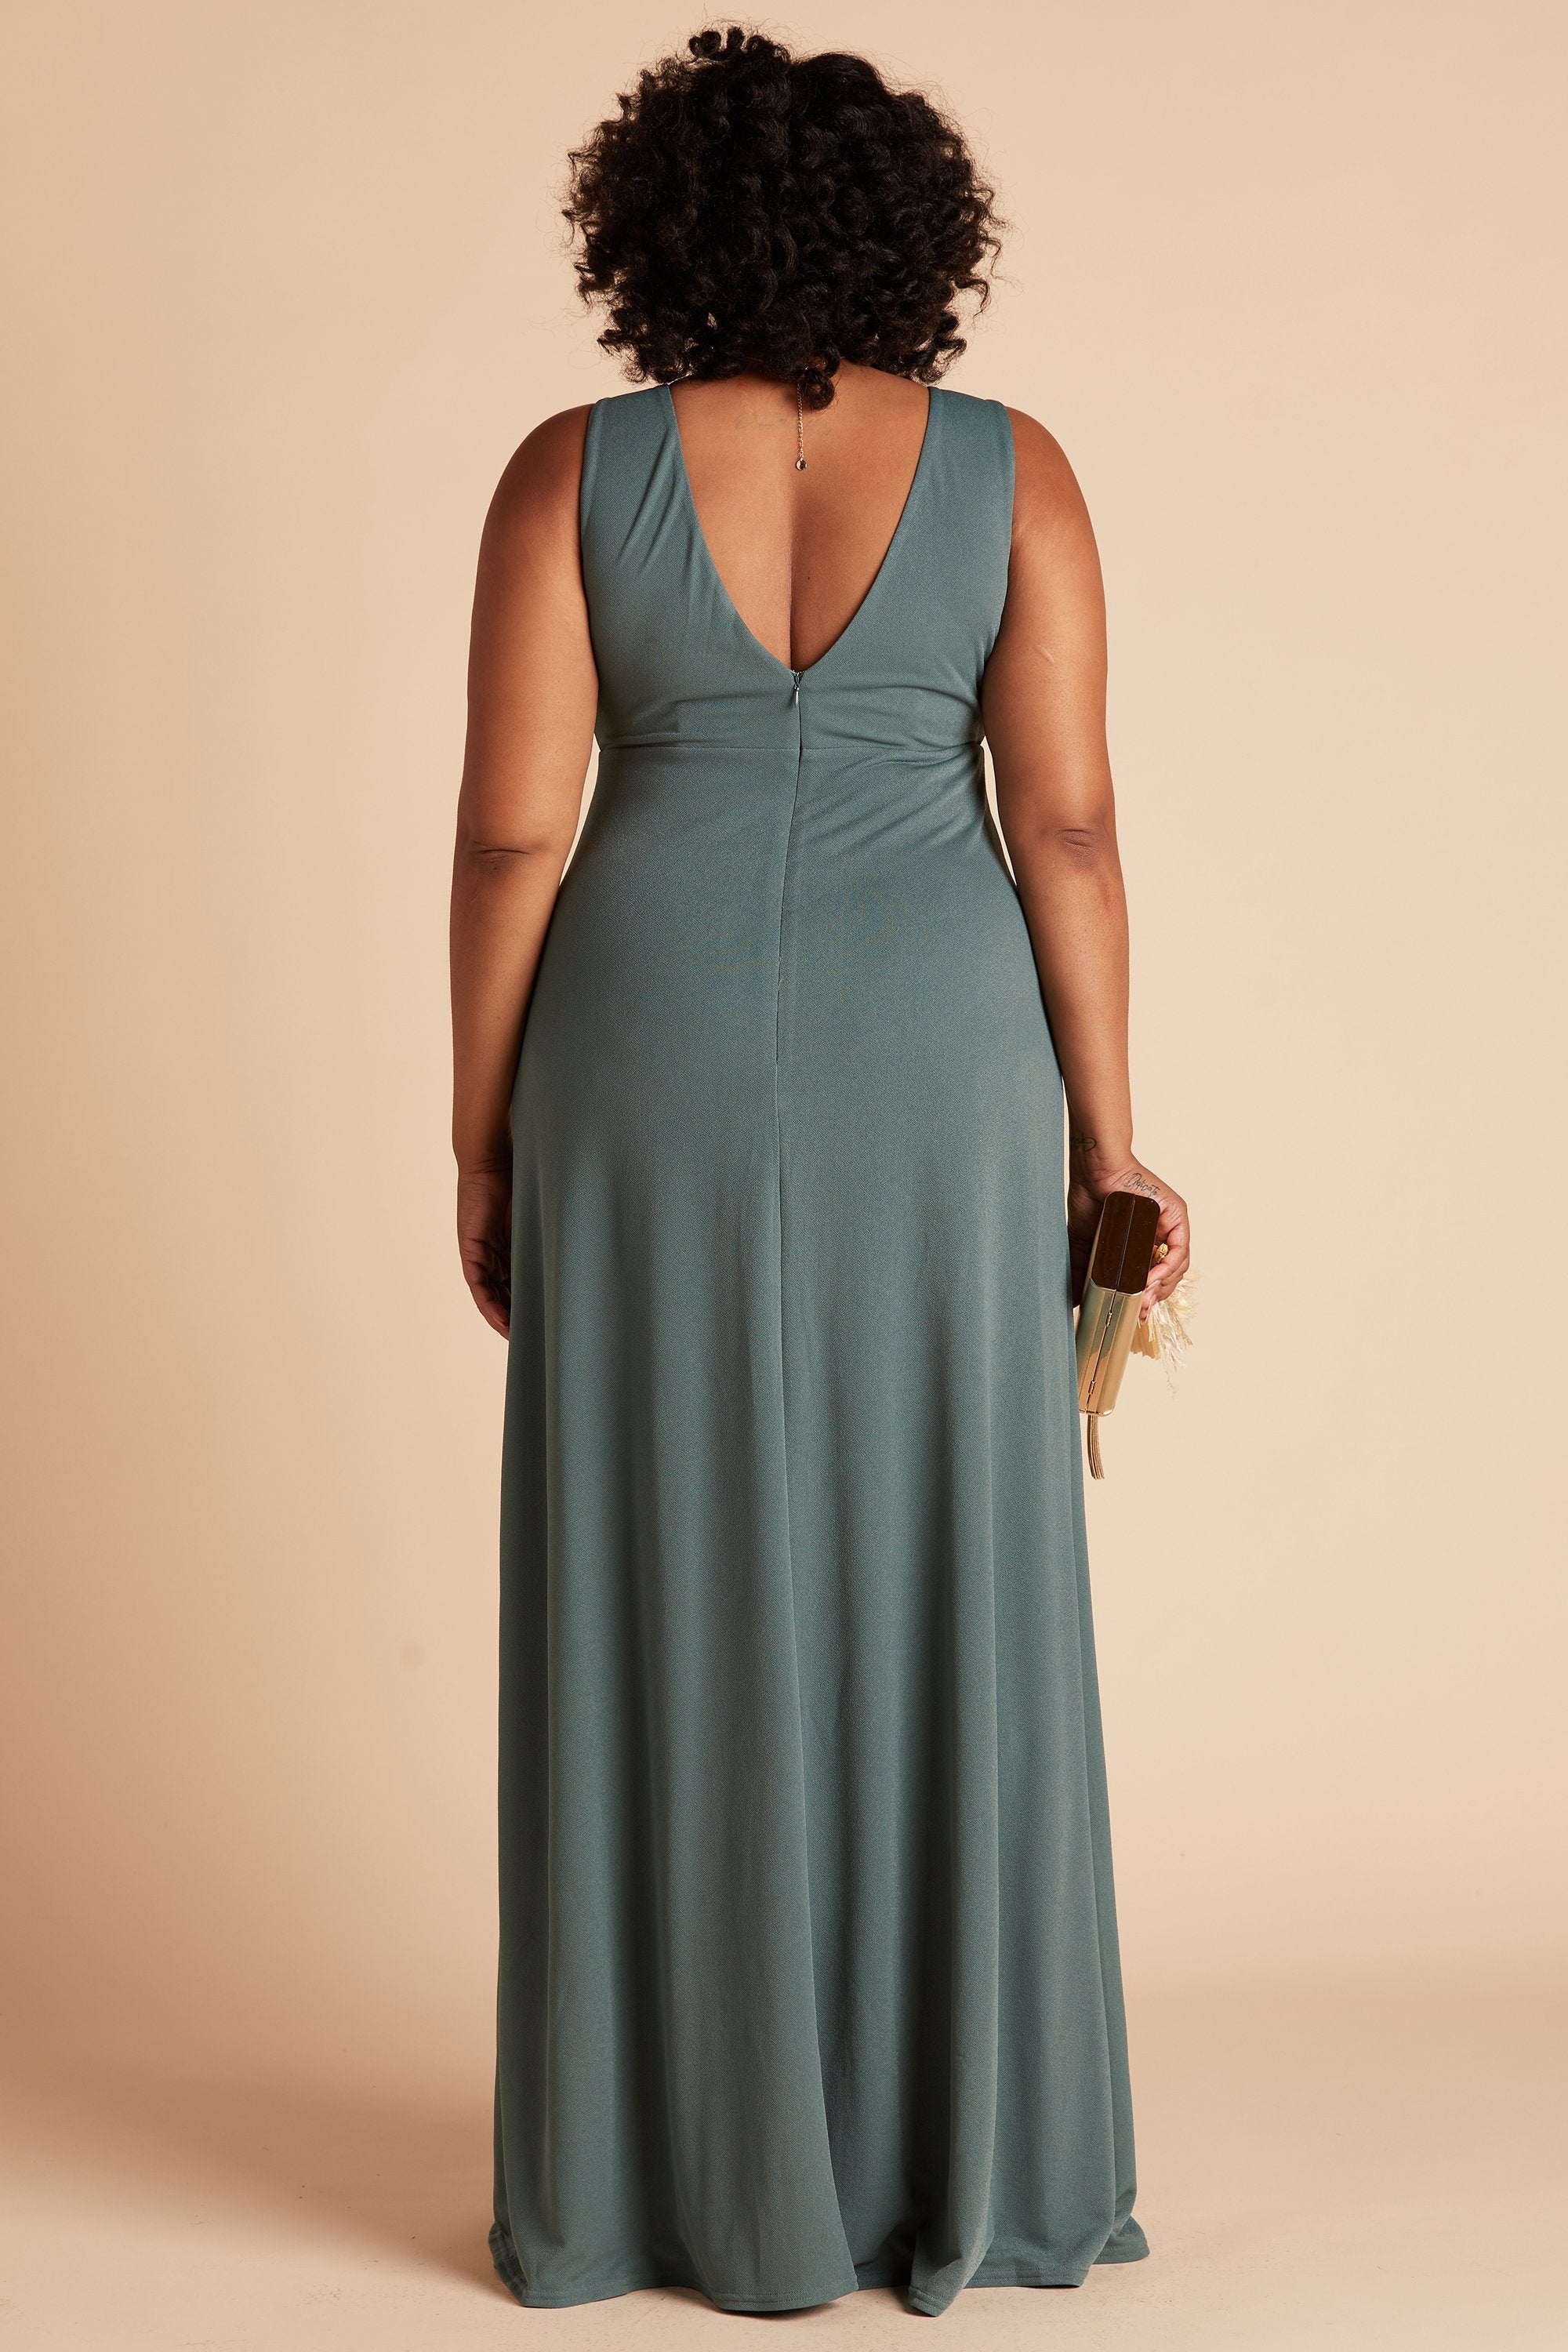 Shamin plus size bridesmaid dress with slit in sea glass green chiffon by Birdy Grey, back view